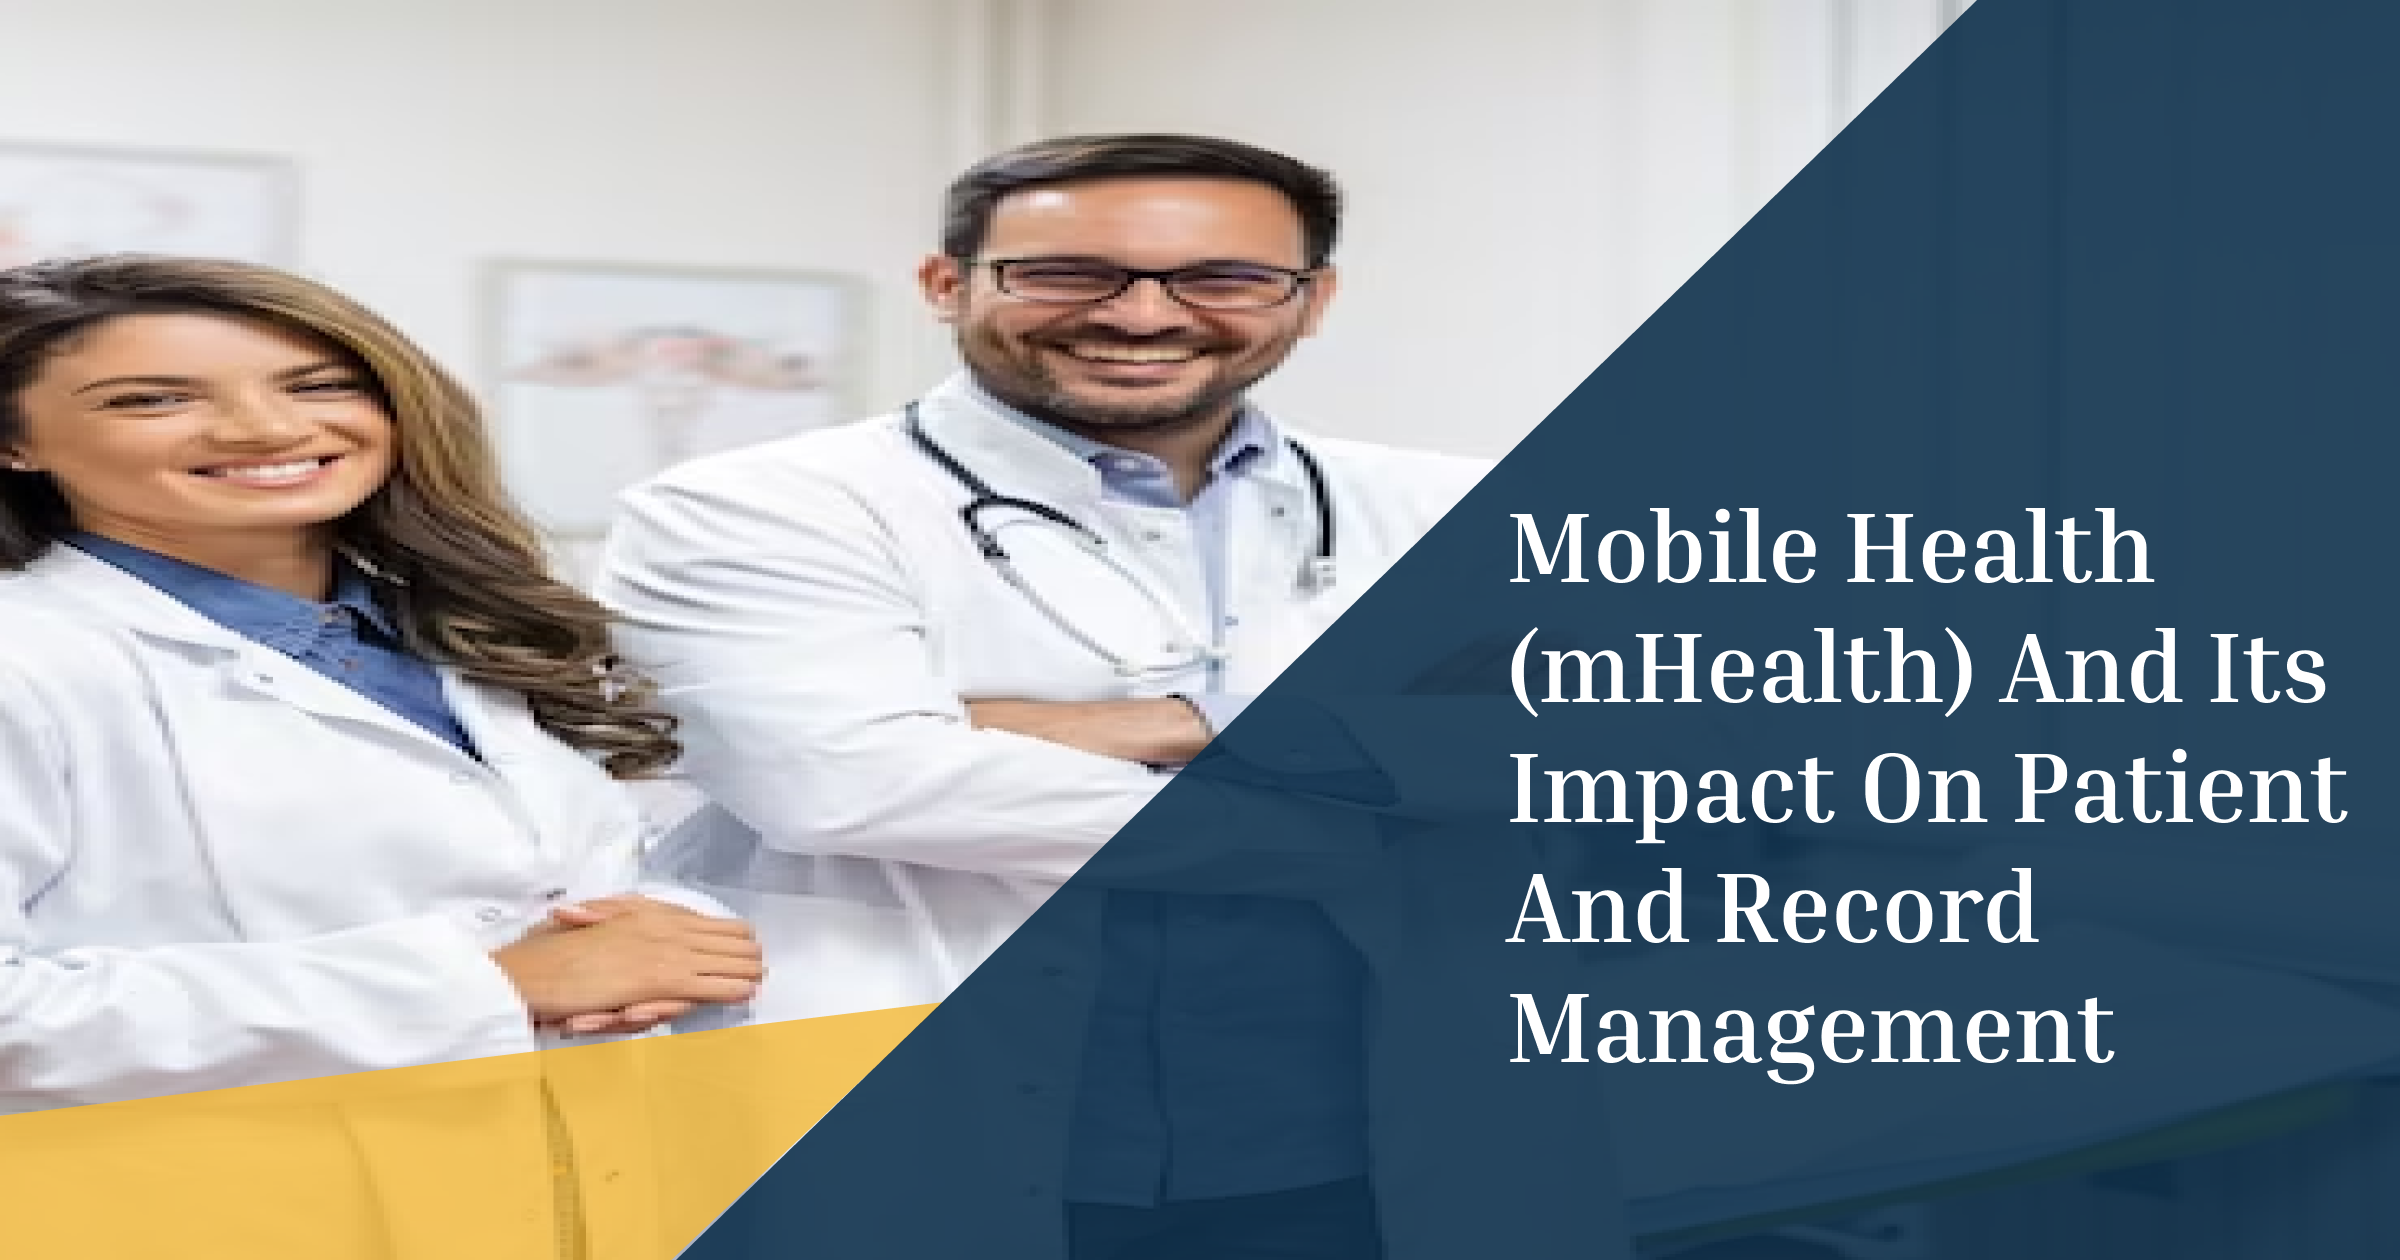 Mobile Health (mHealth) And Its Impact On Patient And Record Management